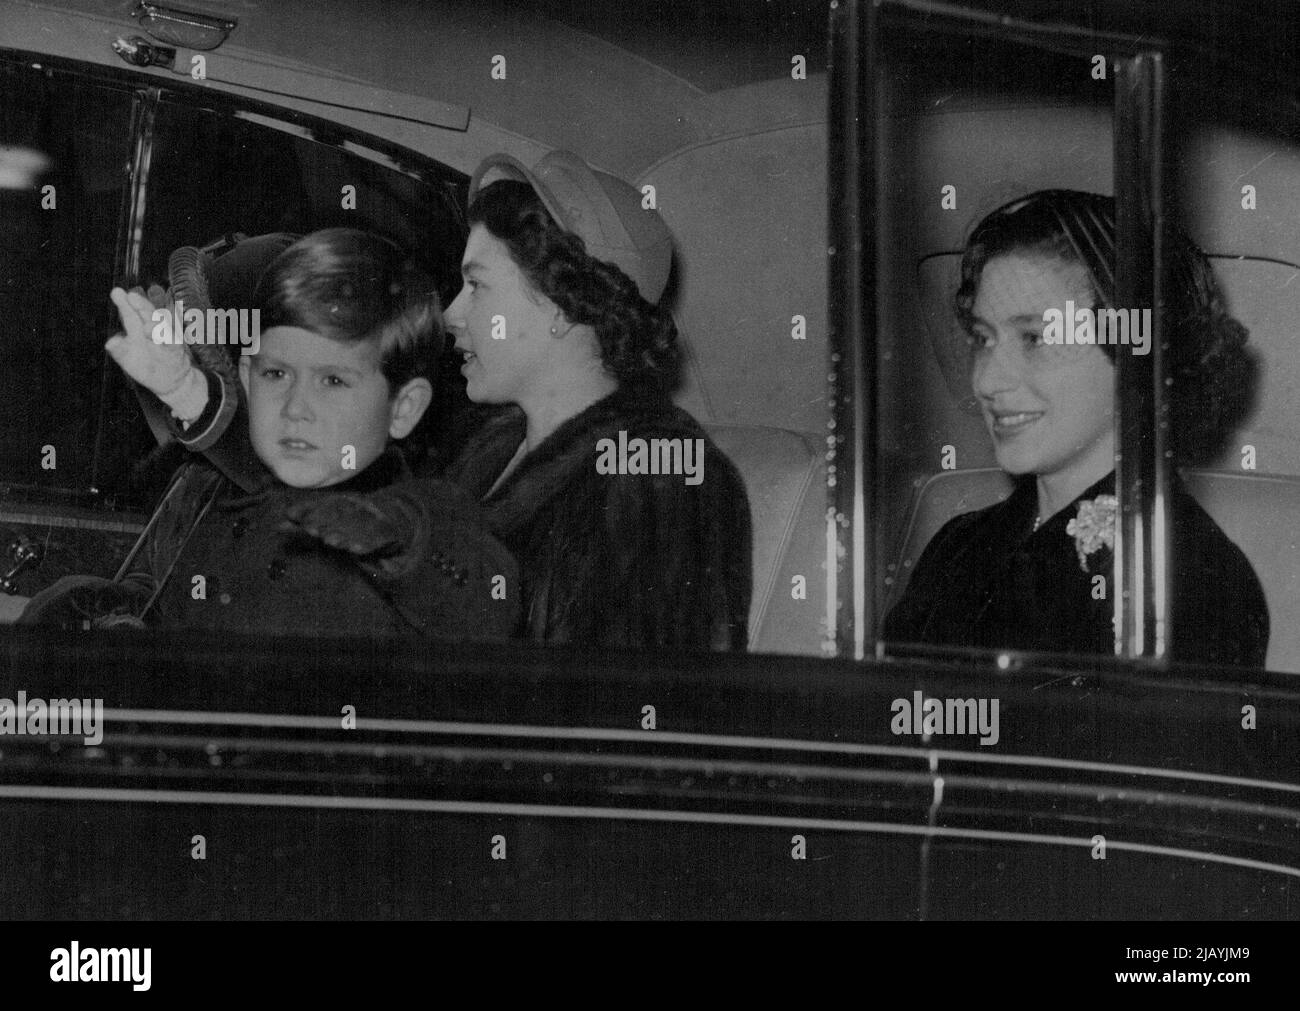 Royal Family Leave For Sandringham : The Queen and her children, Prince Charles and Princess Anne, accompanied by Princess Margaret (right) arriving by car at King's Cross station to-day when they left to spend Christmas at Sandringham. Queen Mary also left for Sandringham in the Royal train. They will join the Duke of Edinburgh, who is already at Sandringham. December 22, 1952. Stock Photo